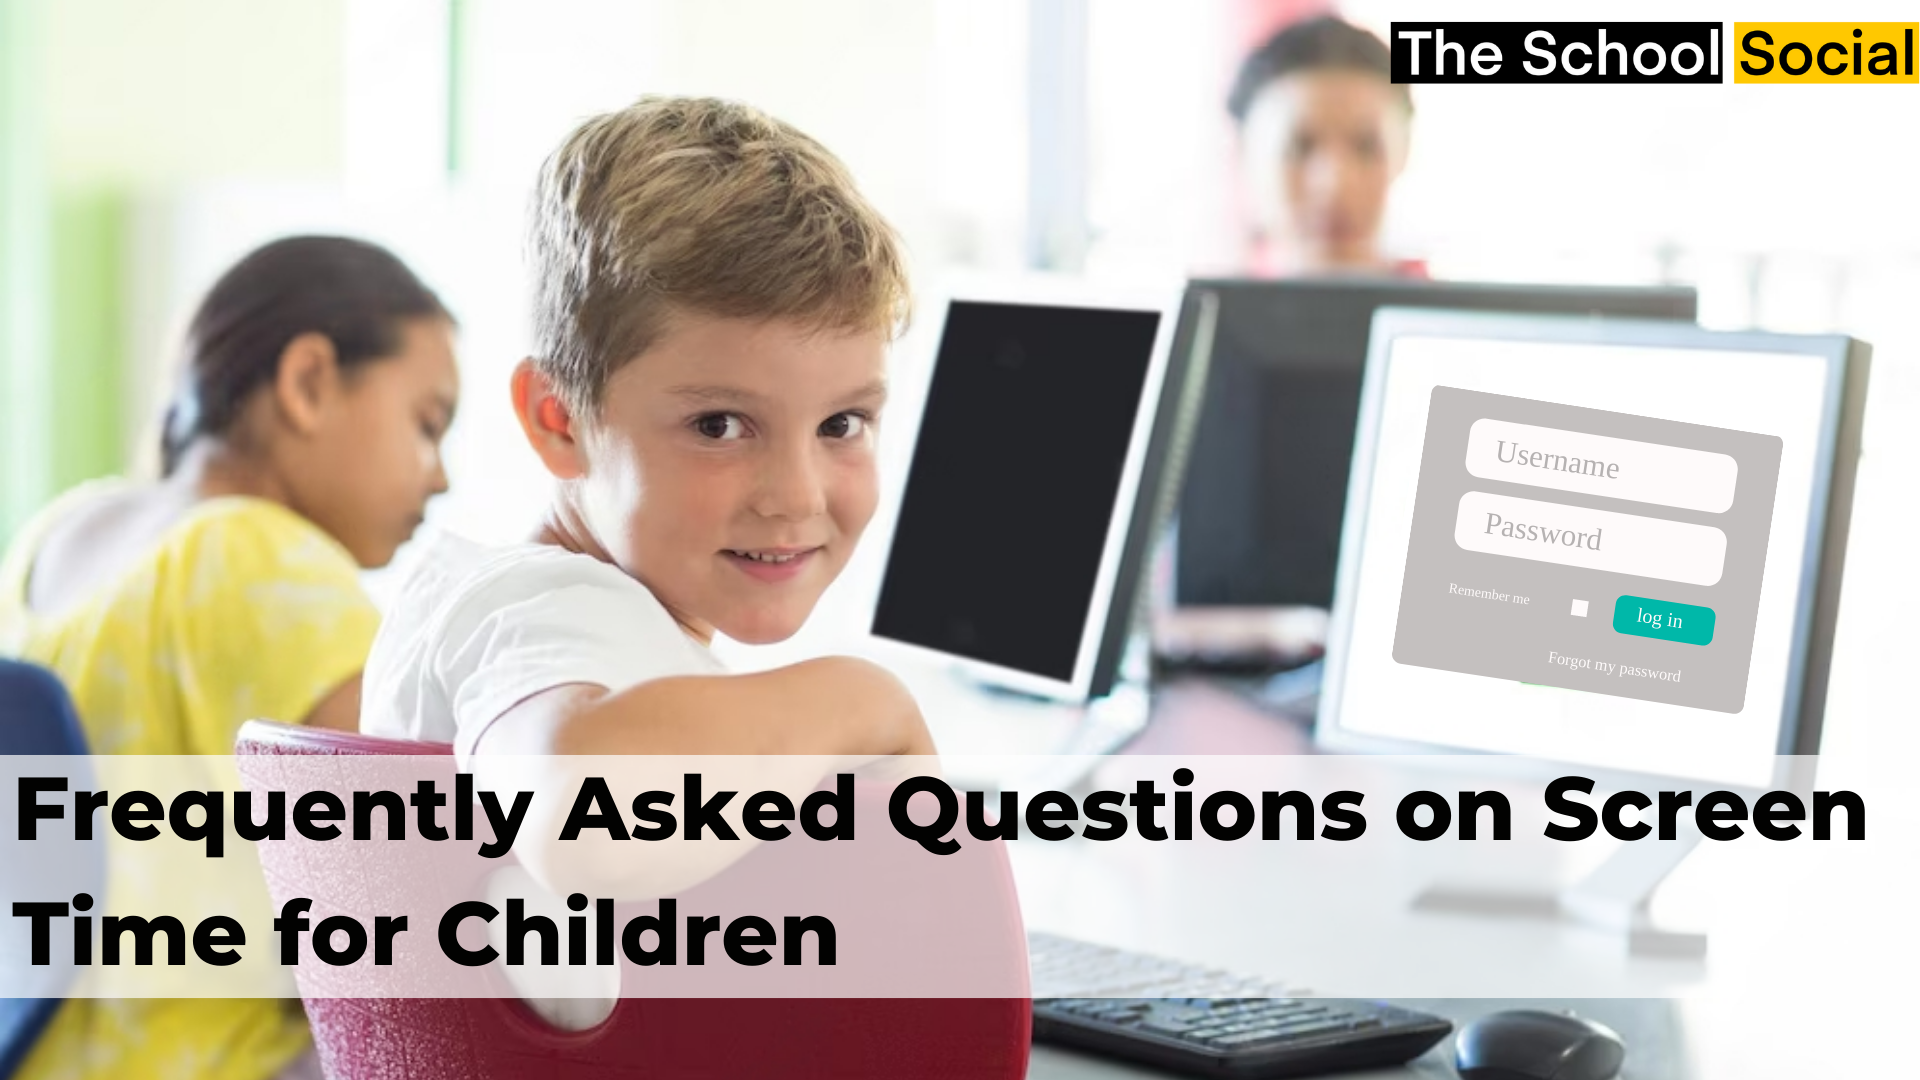 Frequently Asked Questions on screen time for Children